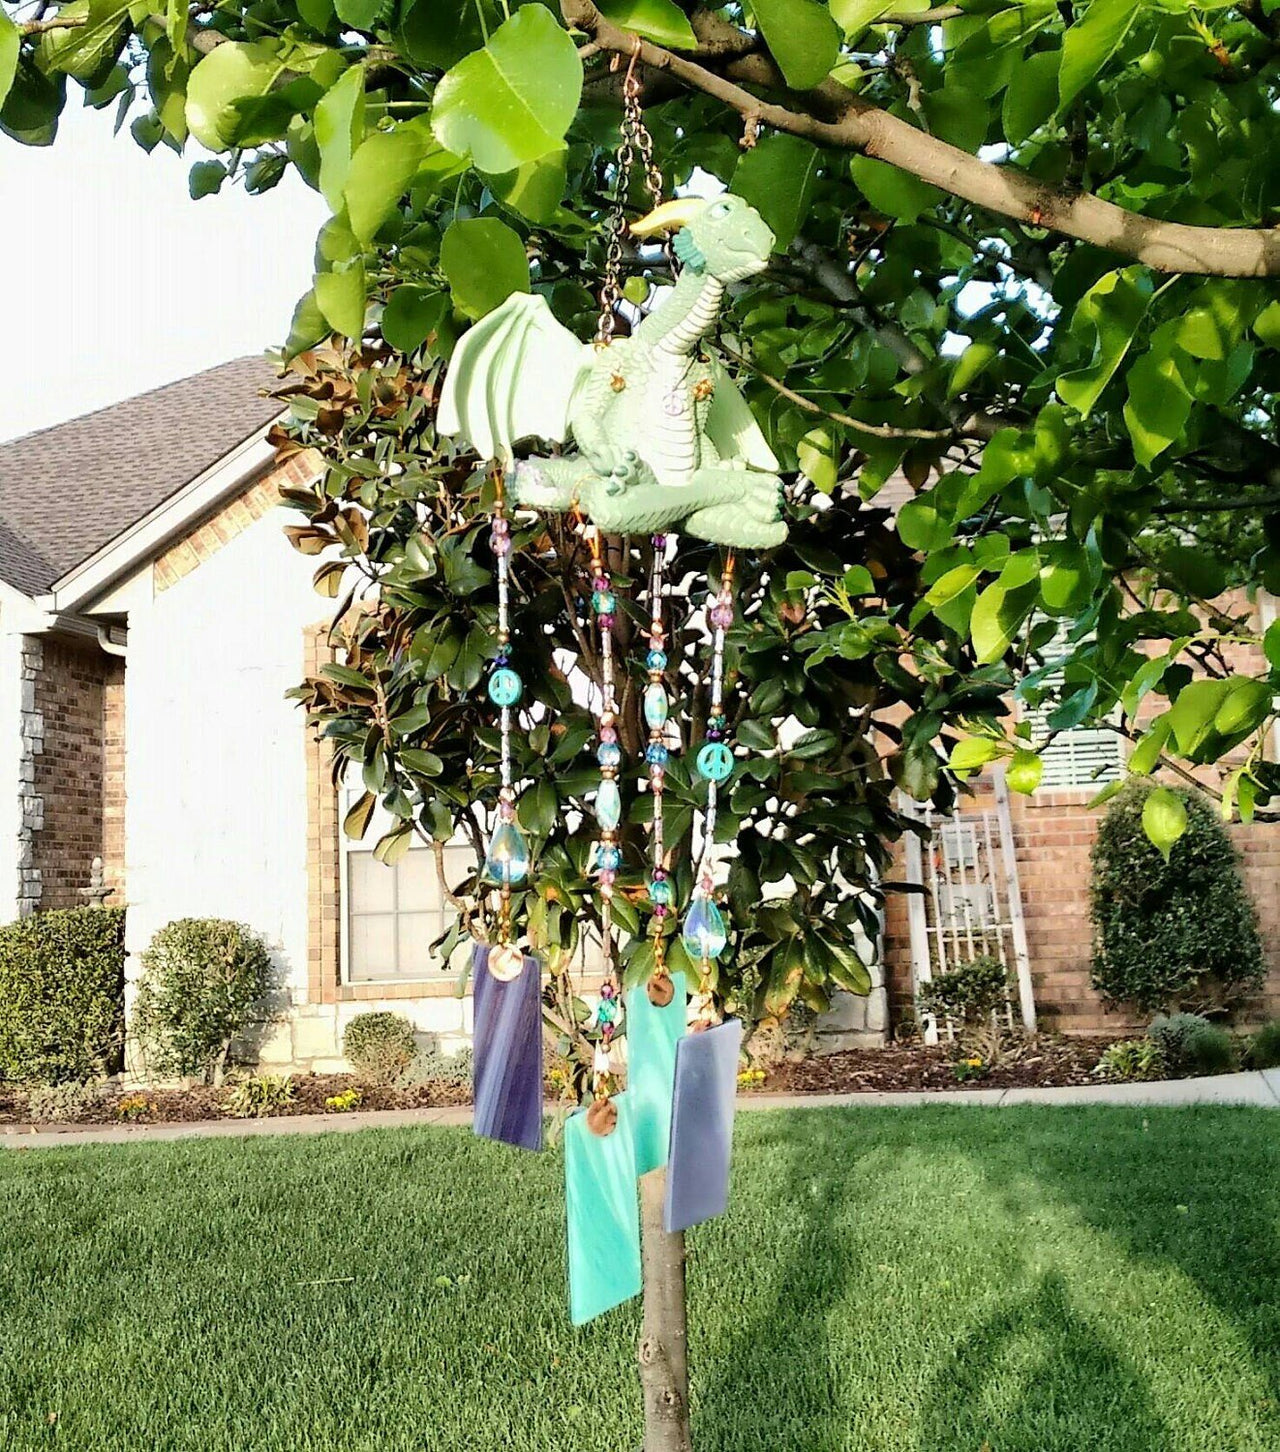 Handcrafted peace dragon wind chime garden ornament